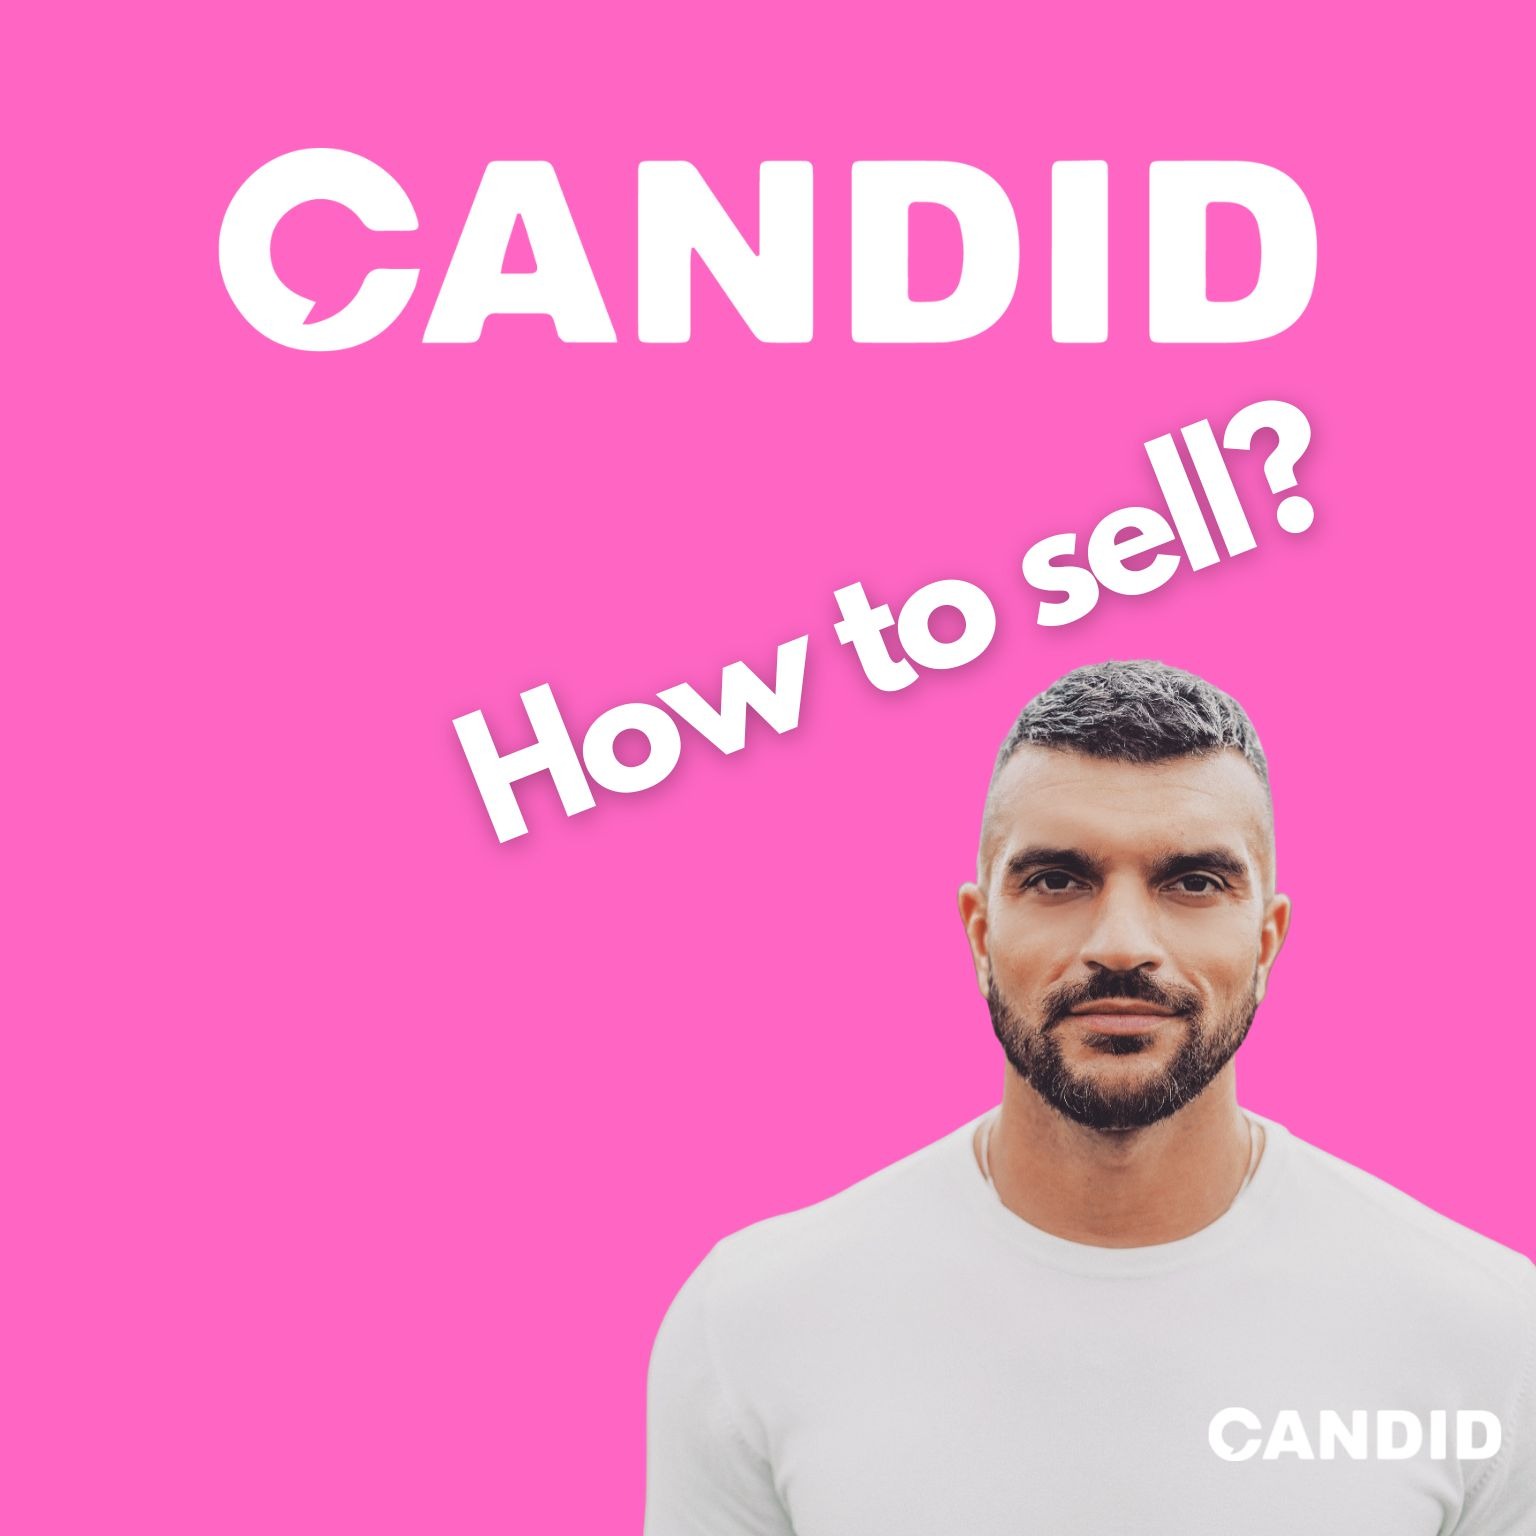 Candid advice on how to sell!